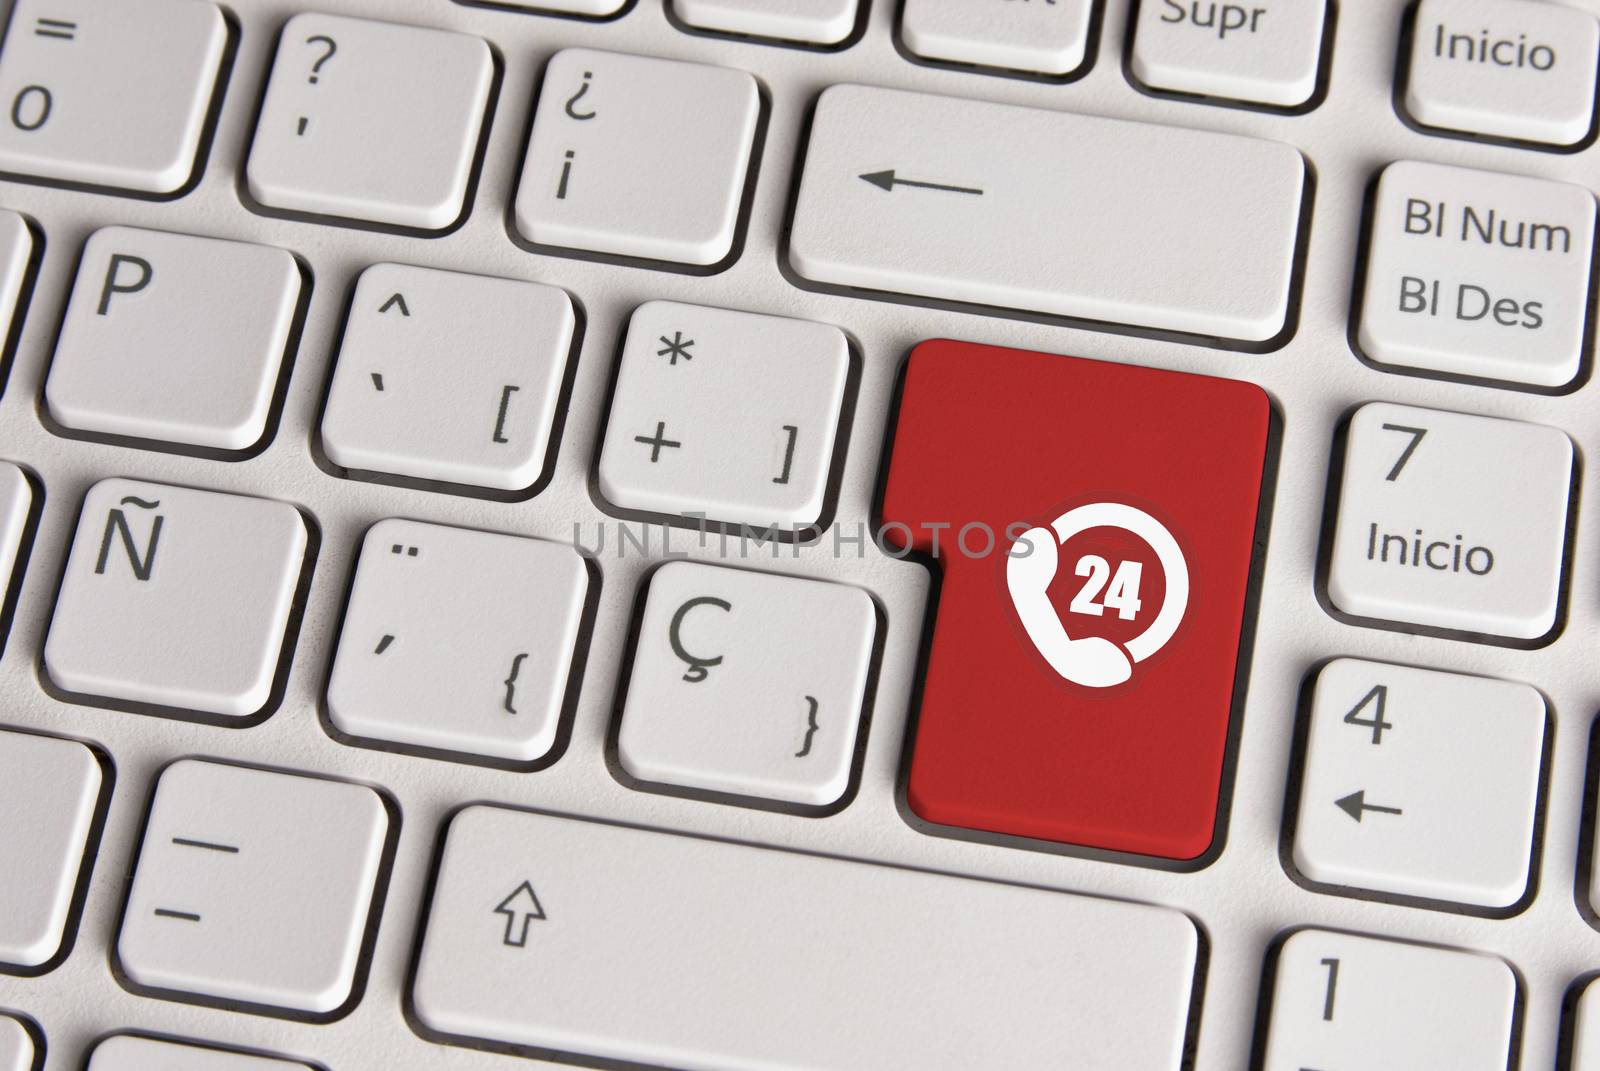 Spanish keyboard with 24 hours call support service phone icon over red background button. Image with clipping path for easy change the key color and editing.